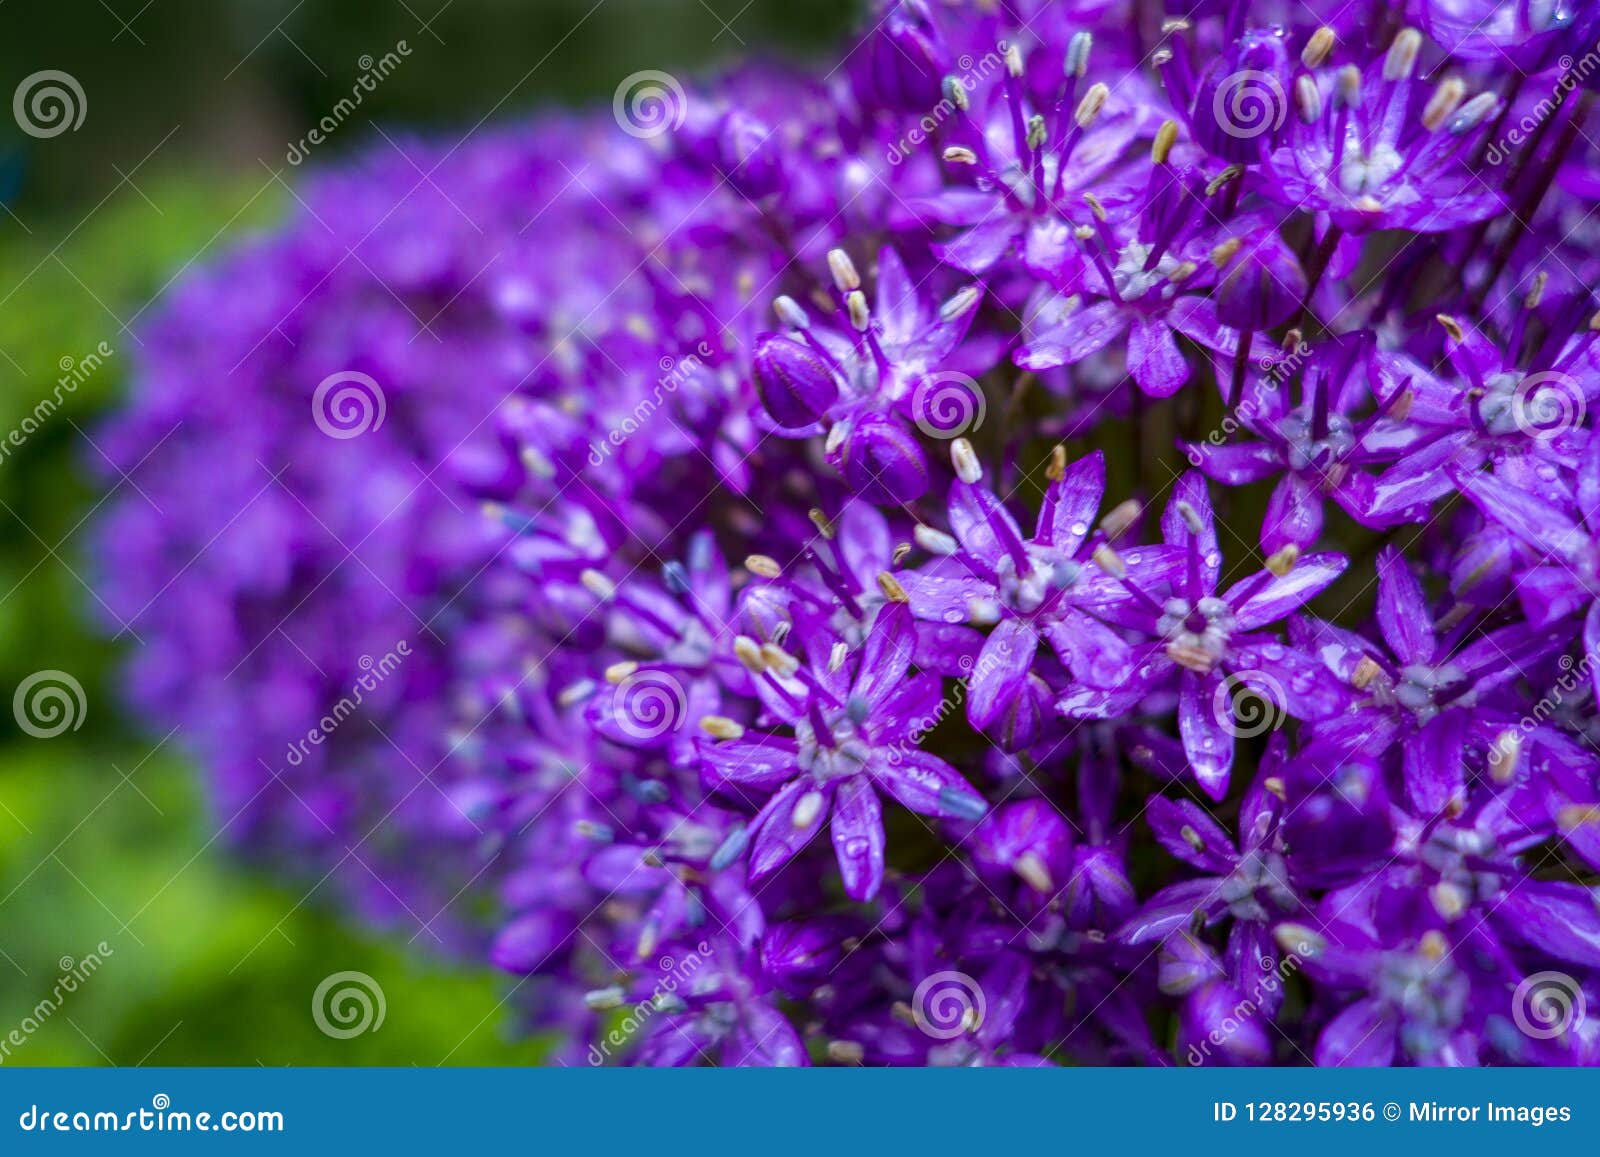 Cluster Of Small Purple Flowers Wet With Rain Drops Stock - 